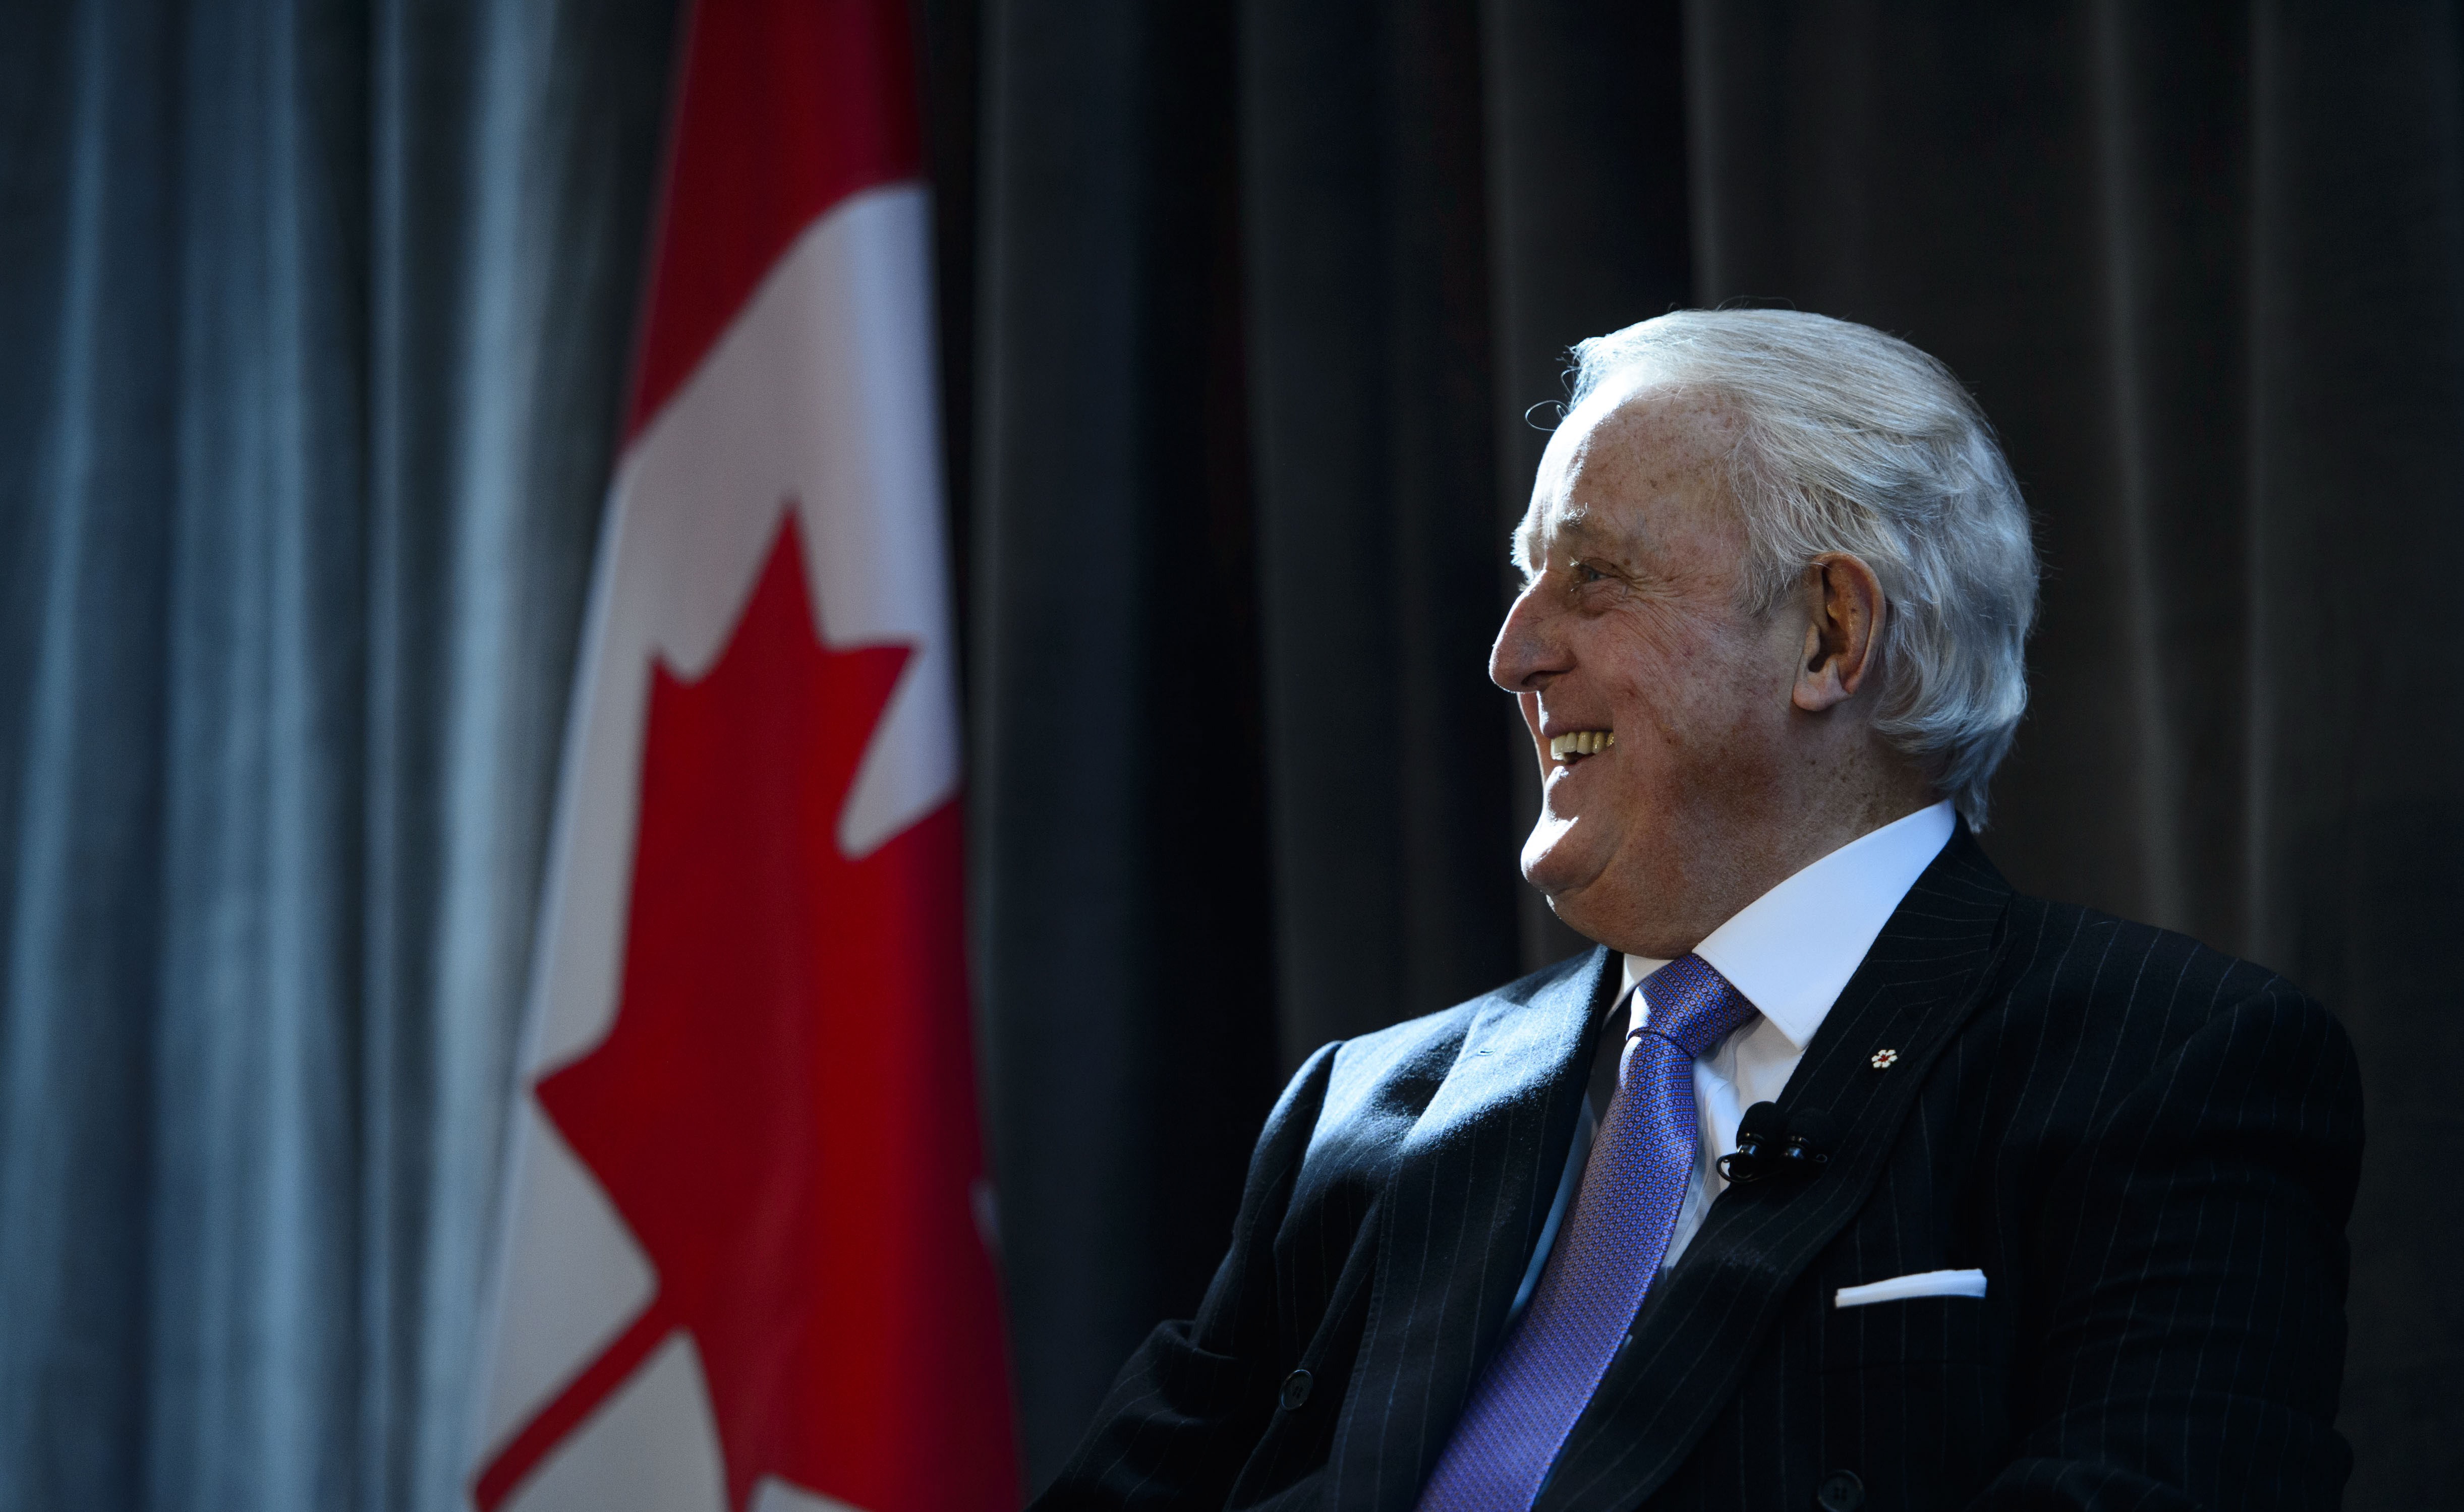 LIVE: Brian Mulroney’s state funeral set to begin shortly